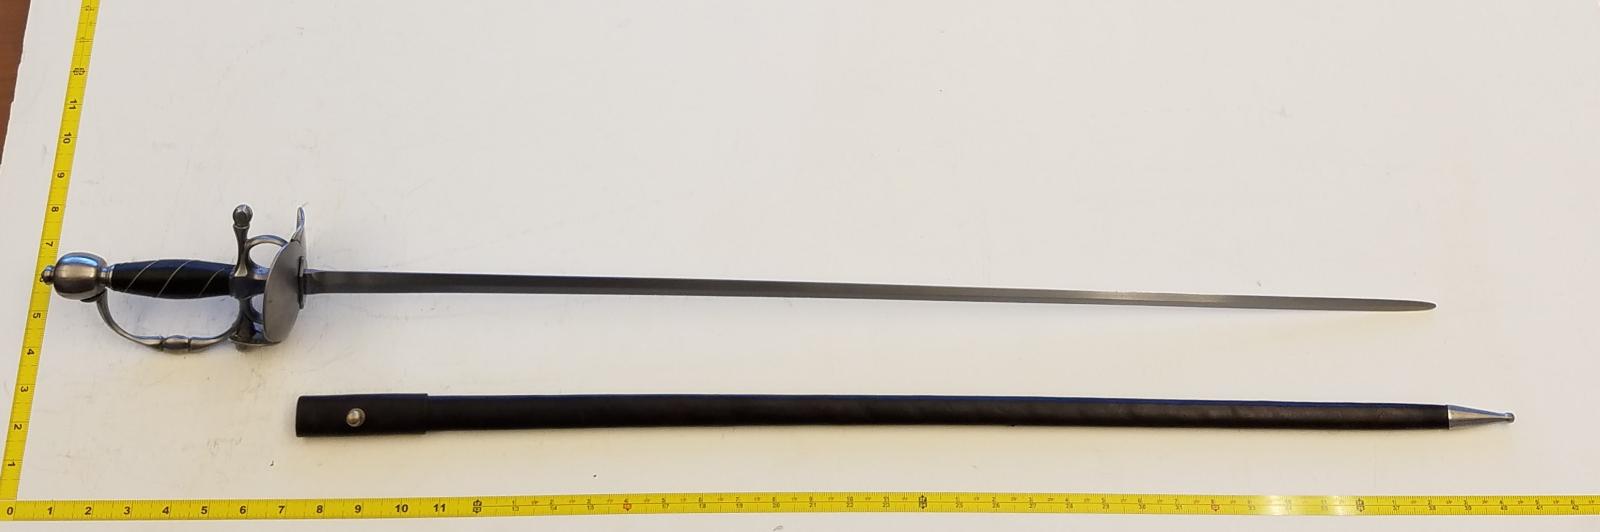 Steel Rapier short sword with Sheath, approved for blade-to-blade stage combat.